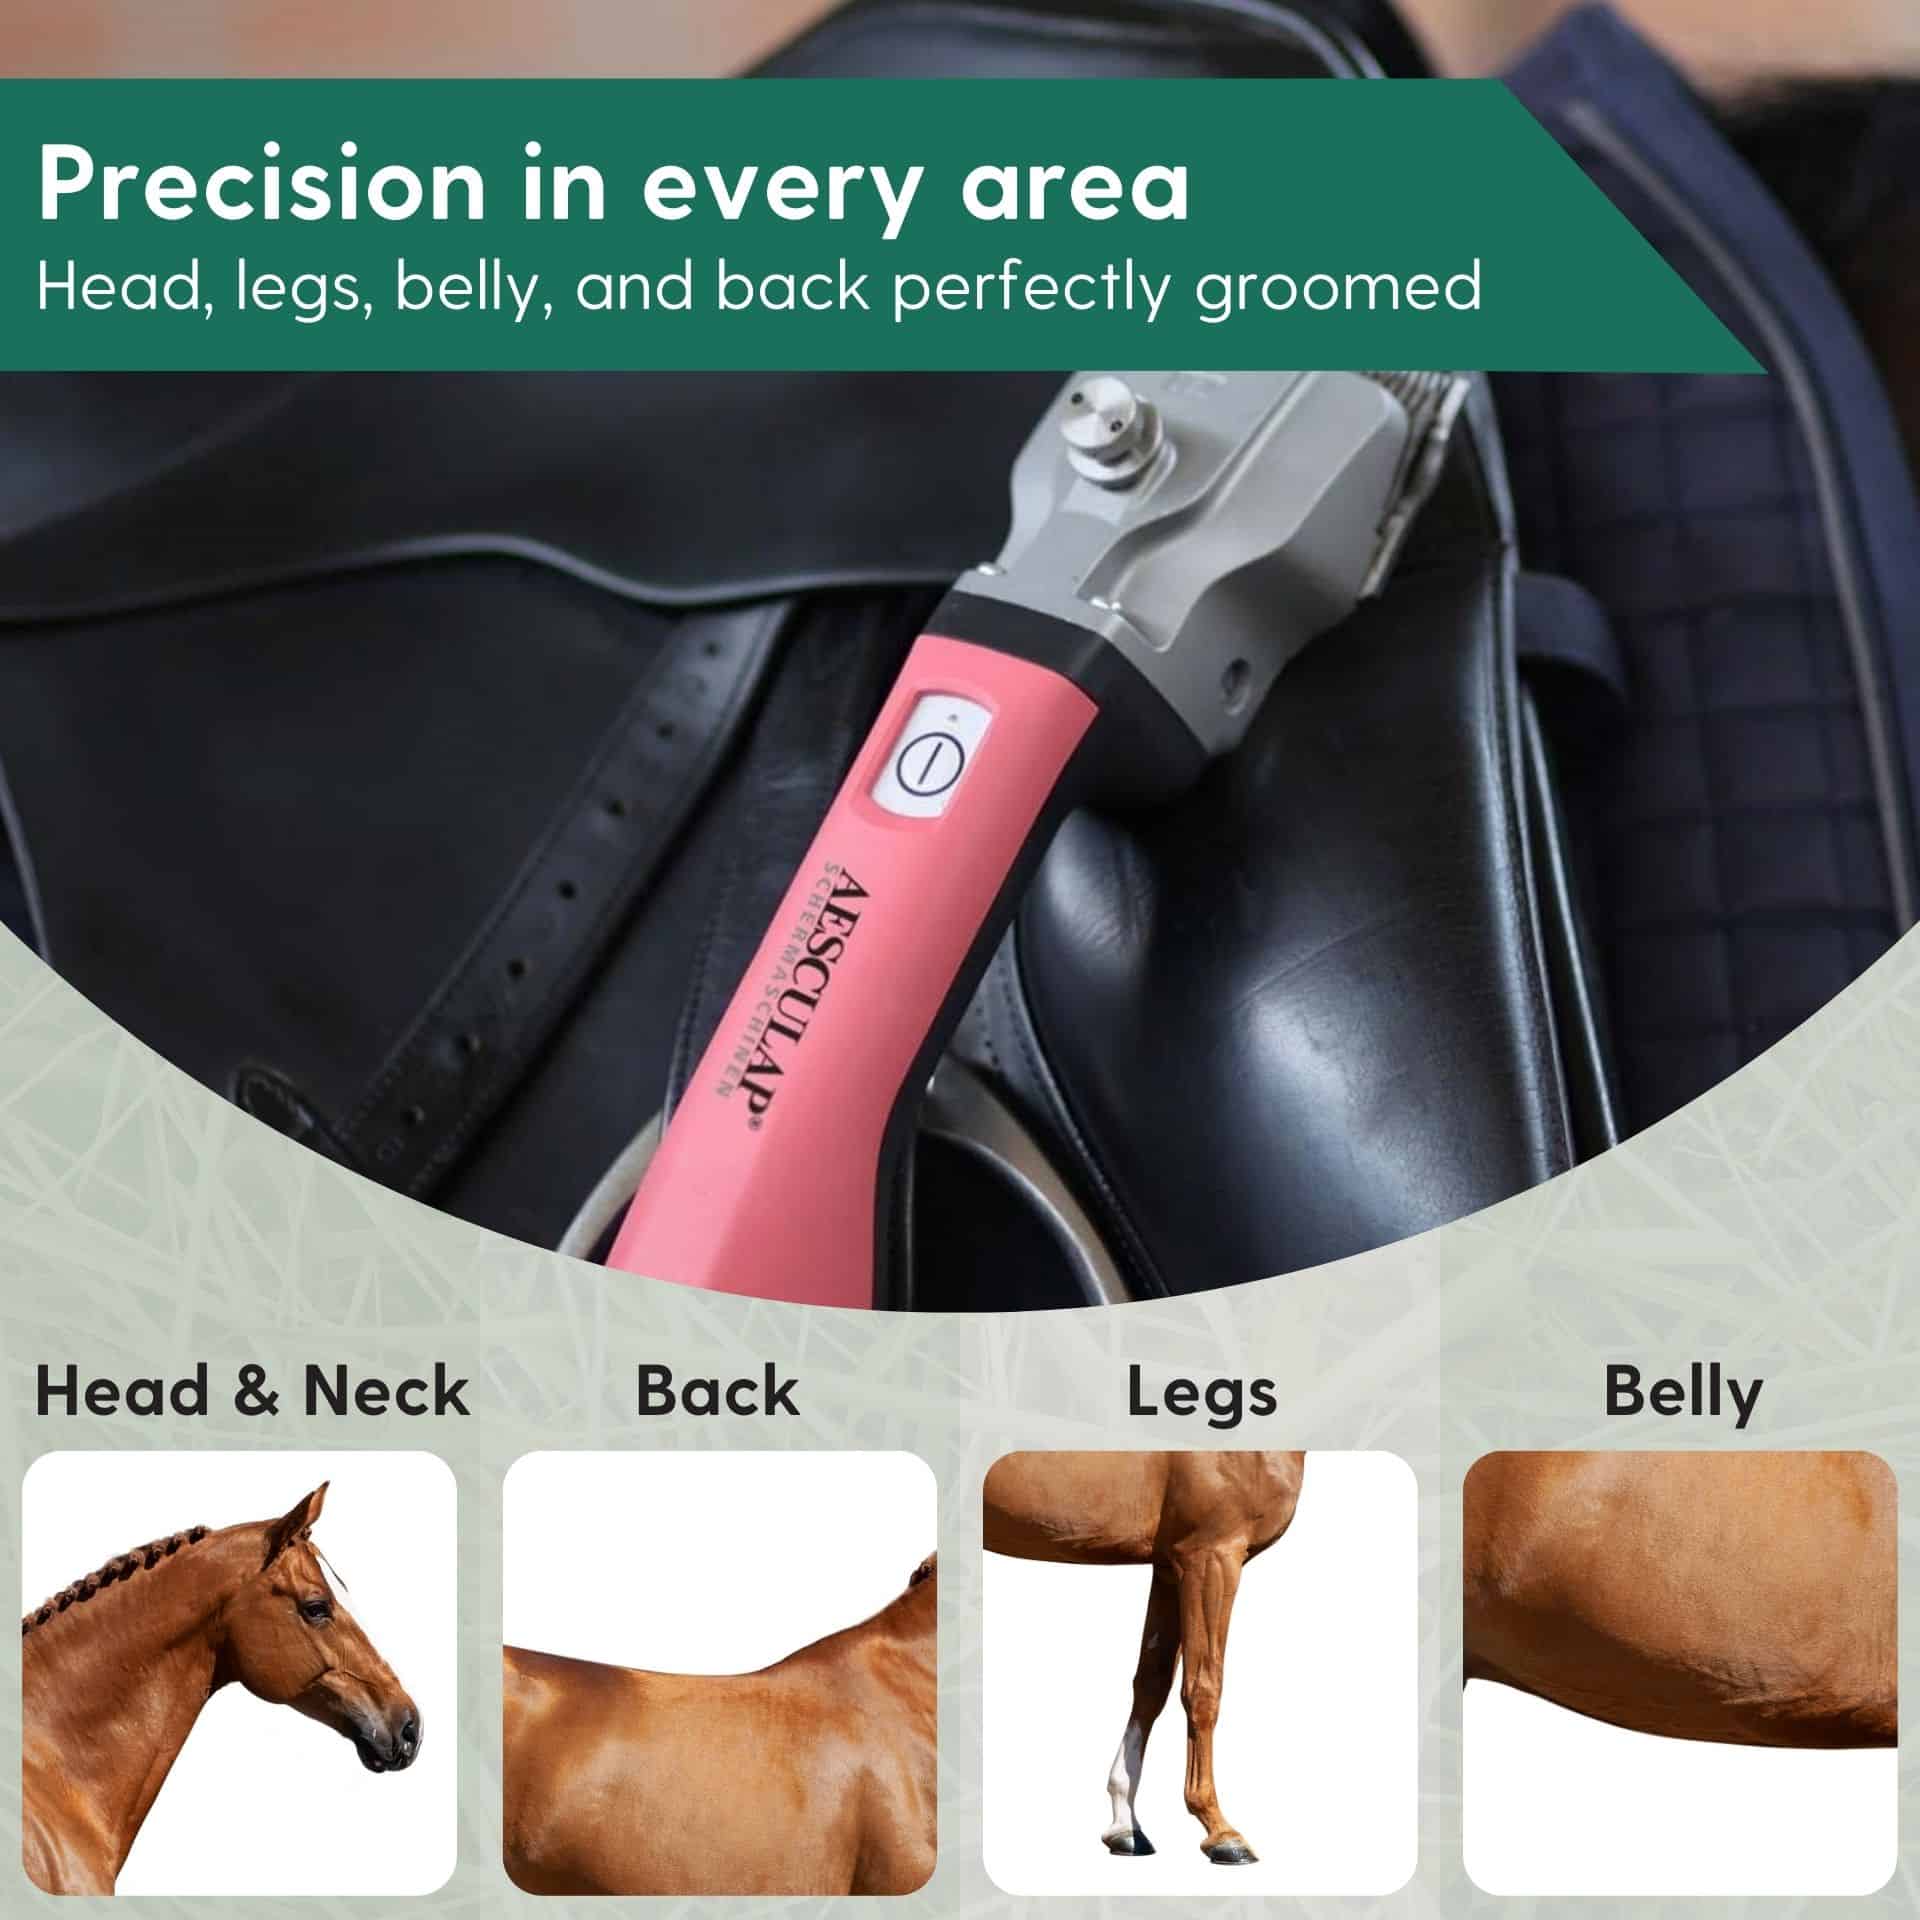 Aesculap Bonum Horse Clipper pink battery + FREE adjustment aid